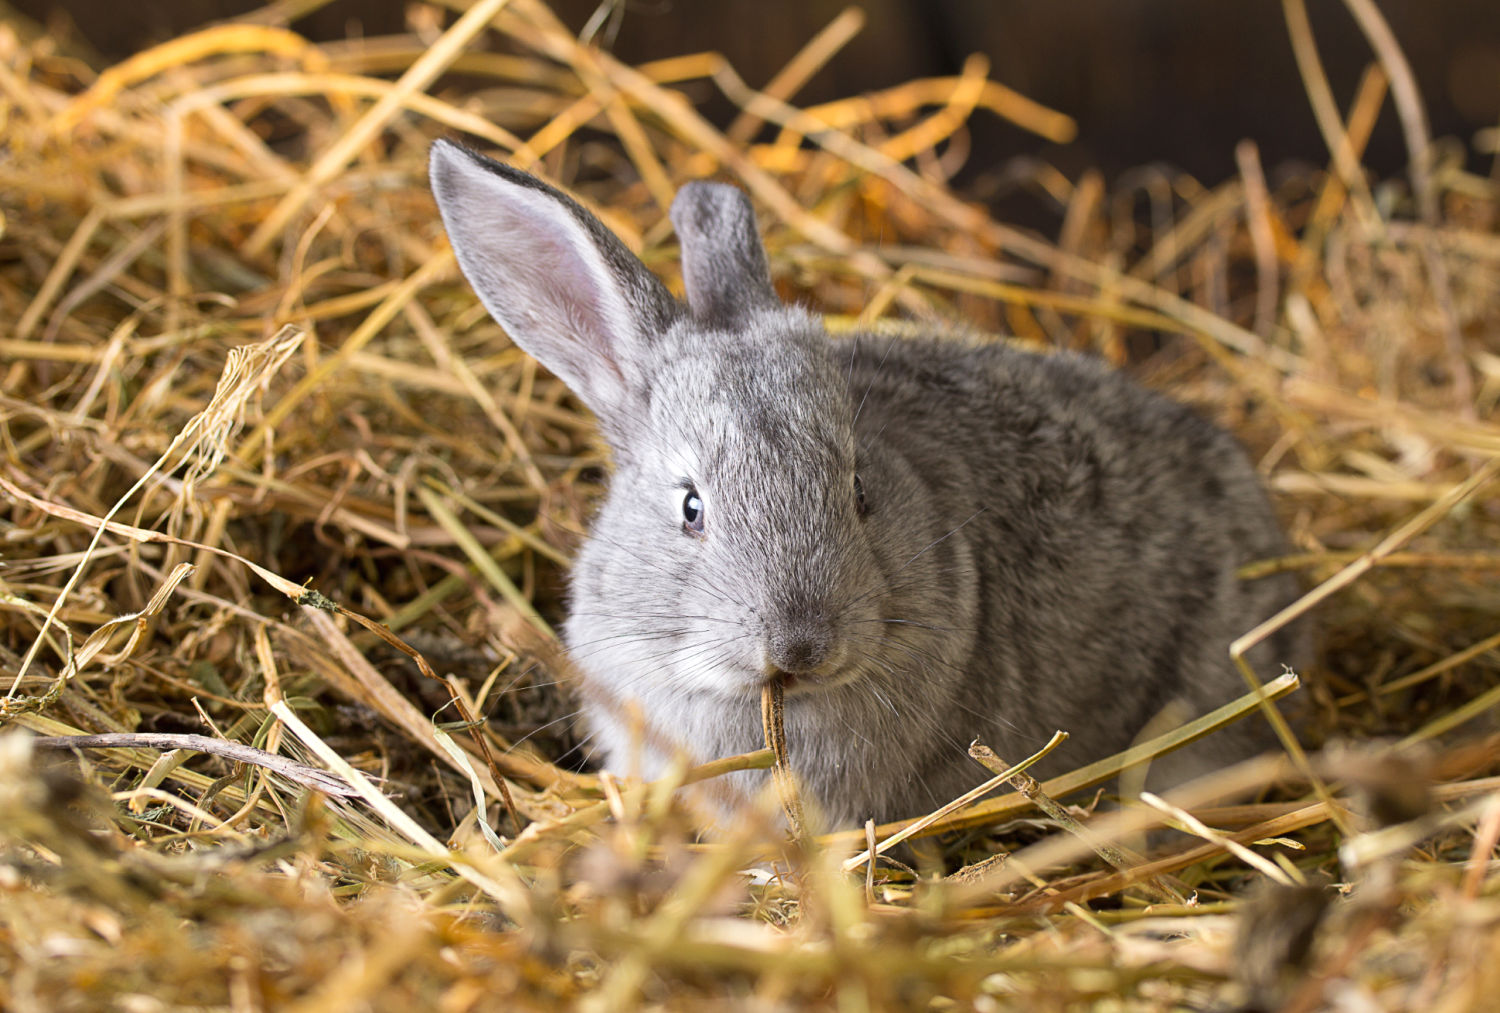 Grey rabbit sitting on straw in a hutch - the best days out in the Cotswolds with kids